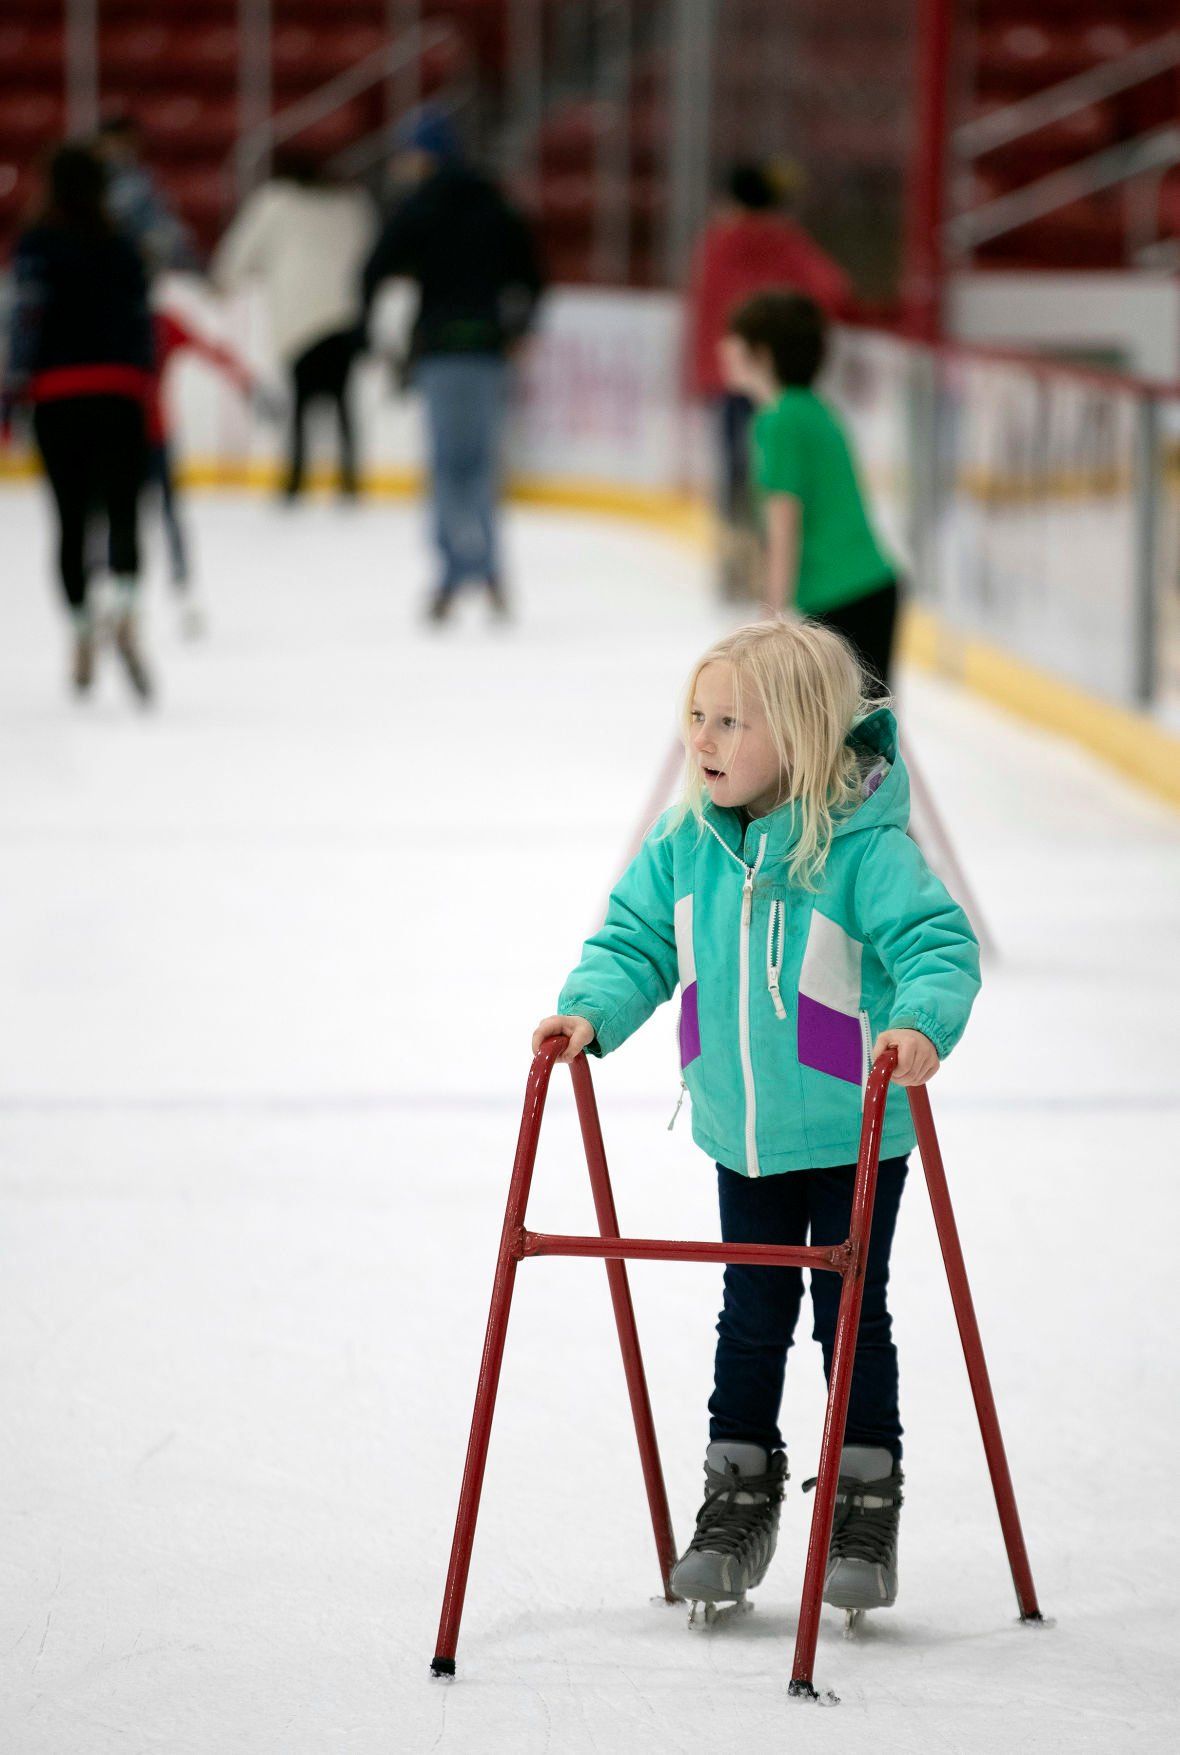 Bekah Sylvester, 5, of Dubuque, enjoys her first time ice skating at the ice center in December.    PHOTO CREDIT: Stephen Gassman